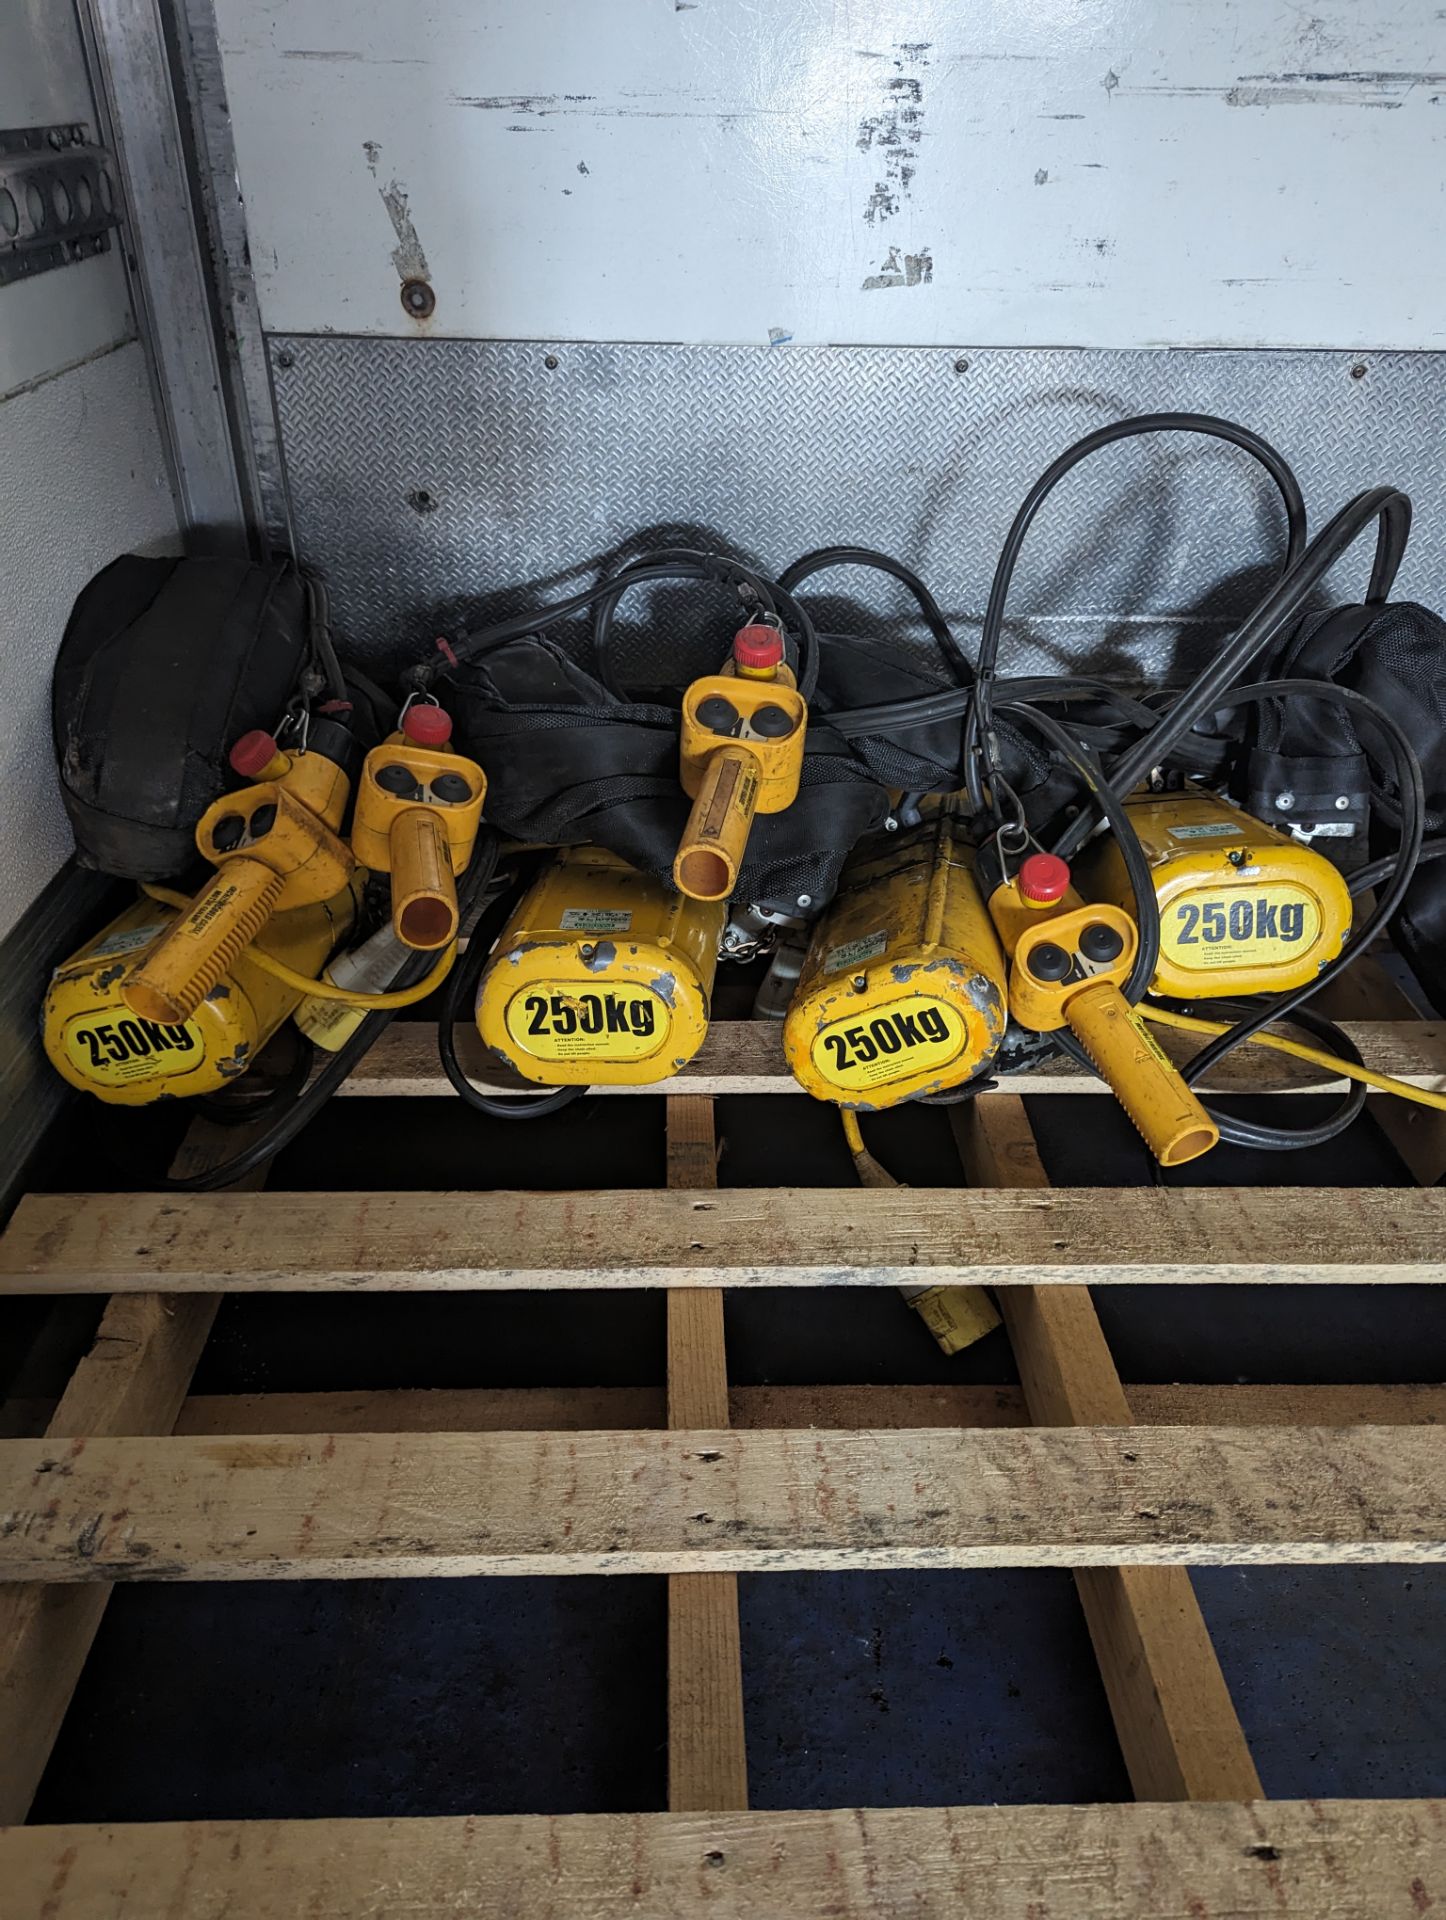 250KG ELECTRIC HOIST 110V, SLIGHTLY USED IN PERFECT WORKING CONDITION - Image 4 of 4